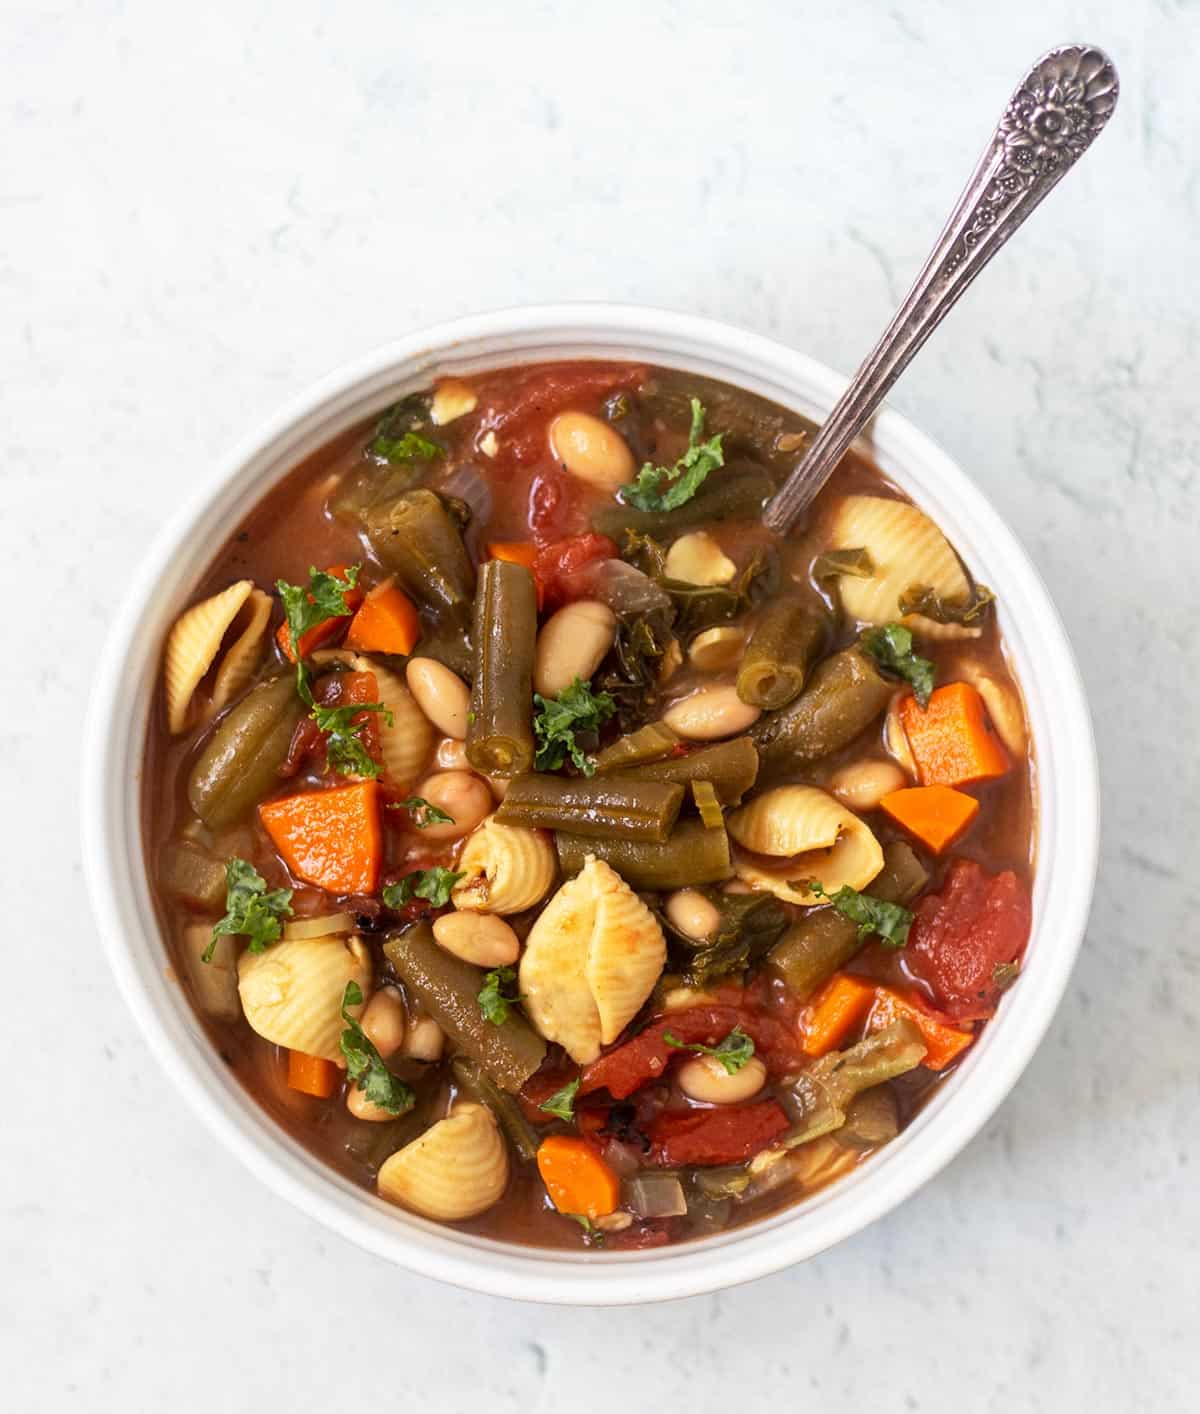 vegetarian minestrone soup in a white bowl with a silver spoon.